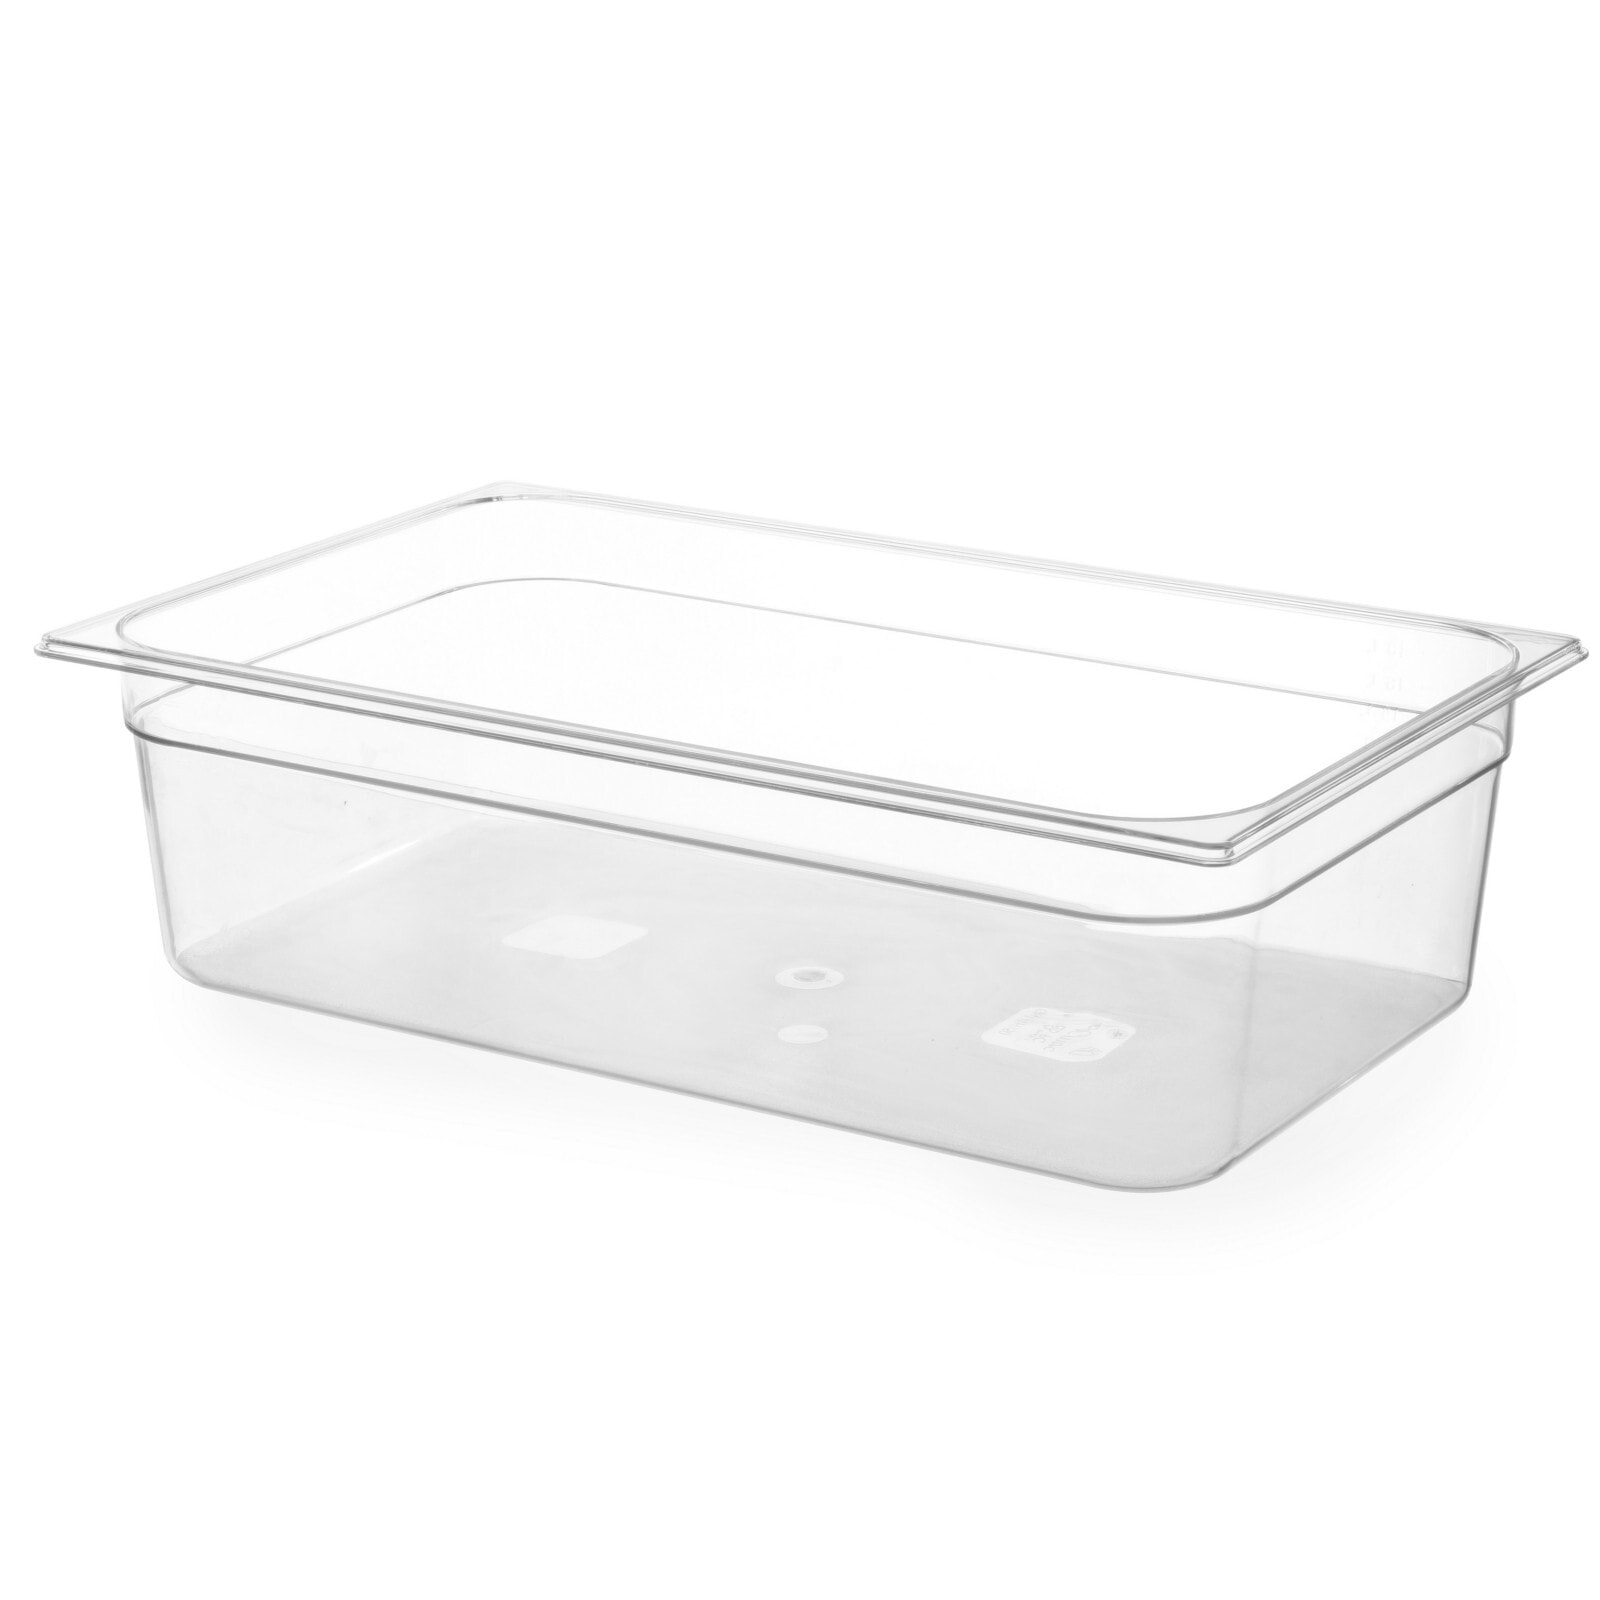 Transparent GN container made of polycarbonate GN 1/1, height 150 mm - Hendi 861219